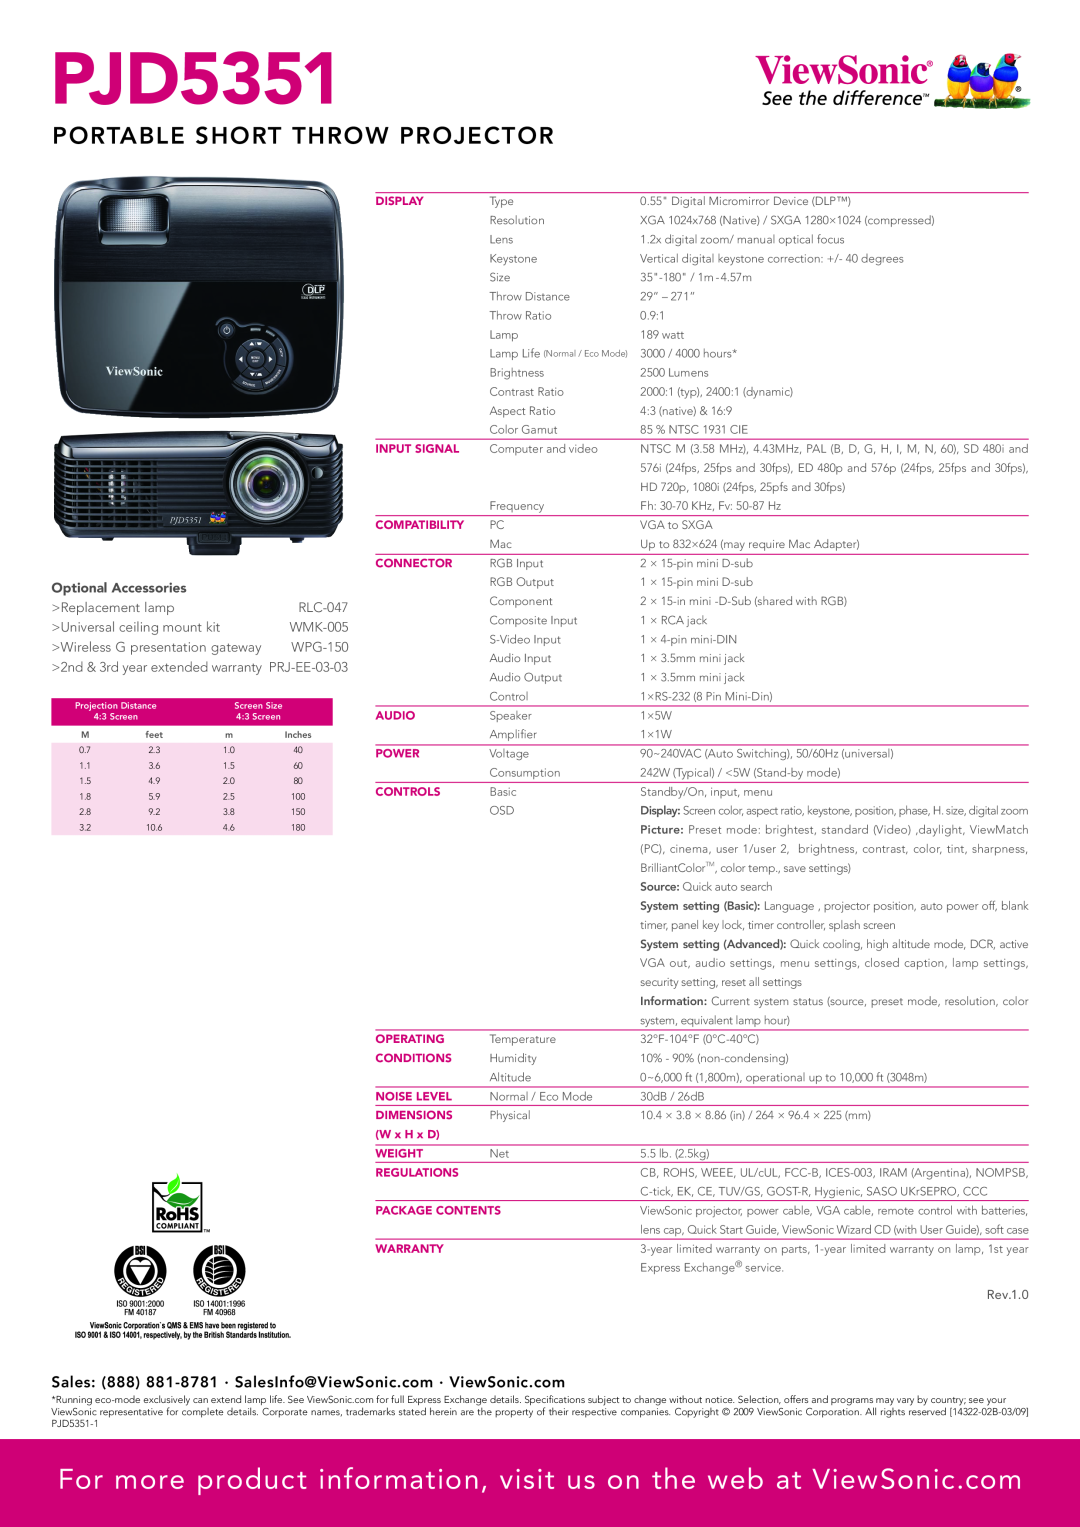 ViewSonic PJD5351 manual For more product information, visit us on the web at ViewSonic.com, Portable Short Throw Projector 